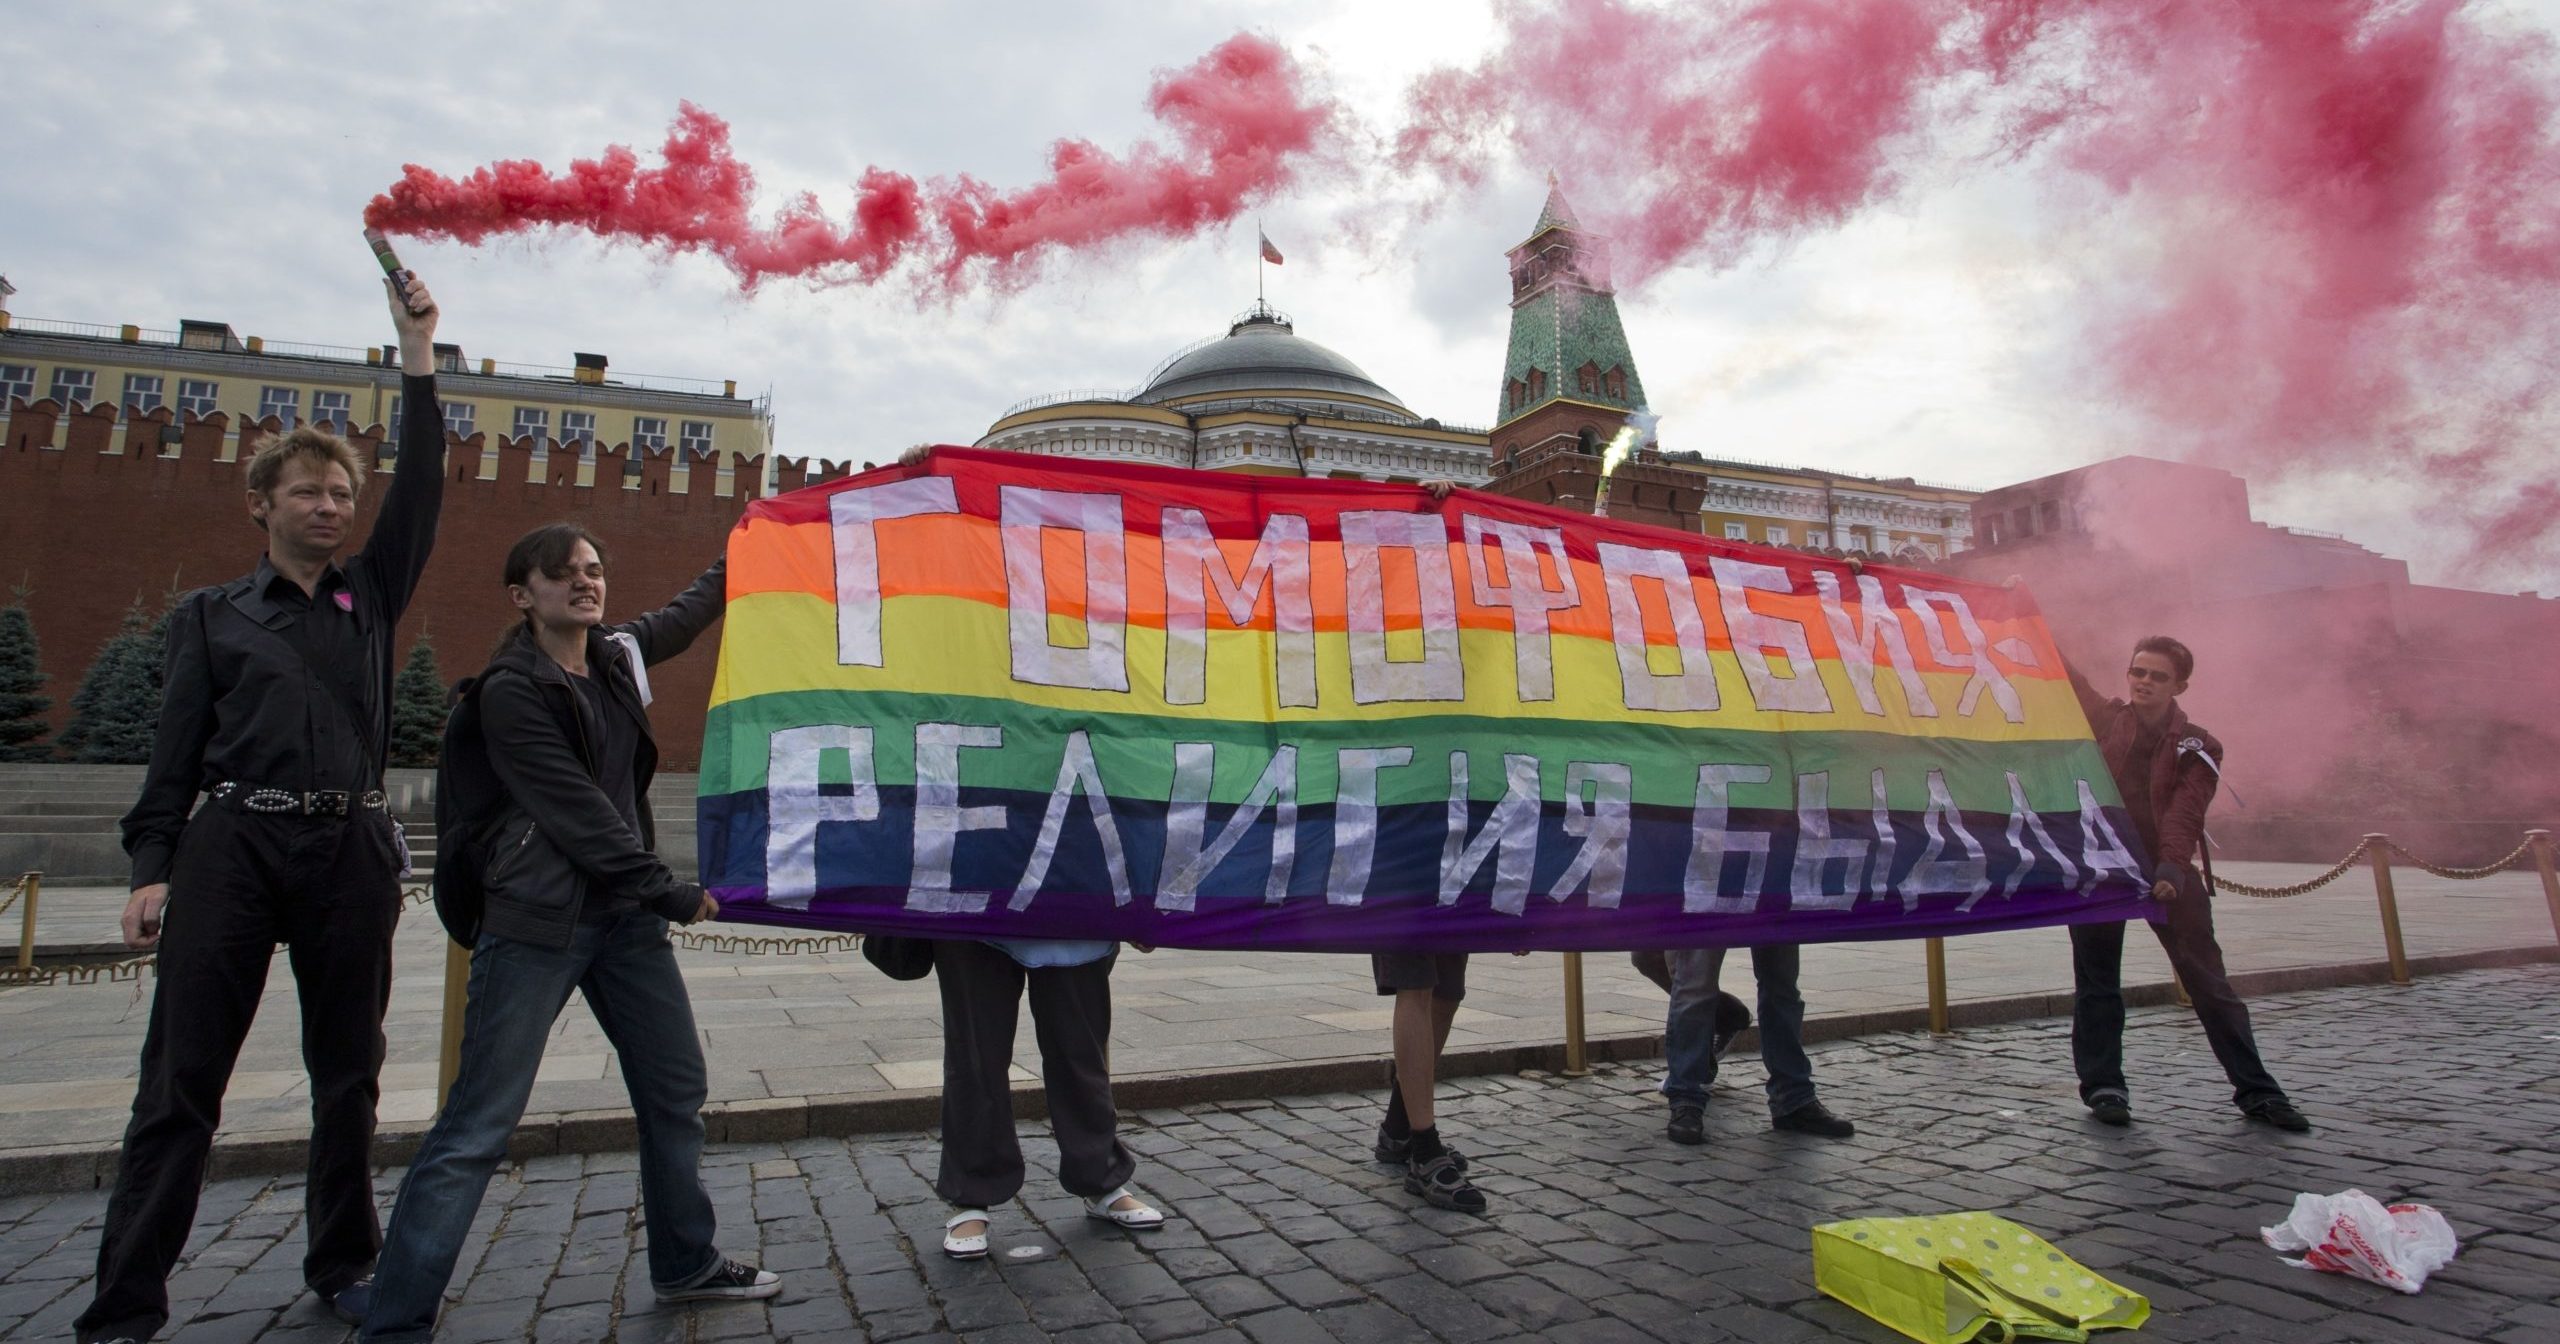 LGBT activists hold a banner reading "Homophobia - the religion of bullies" during a protest in Moscow's Red Square on July 14, 2013.